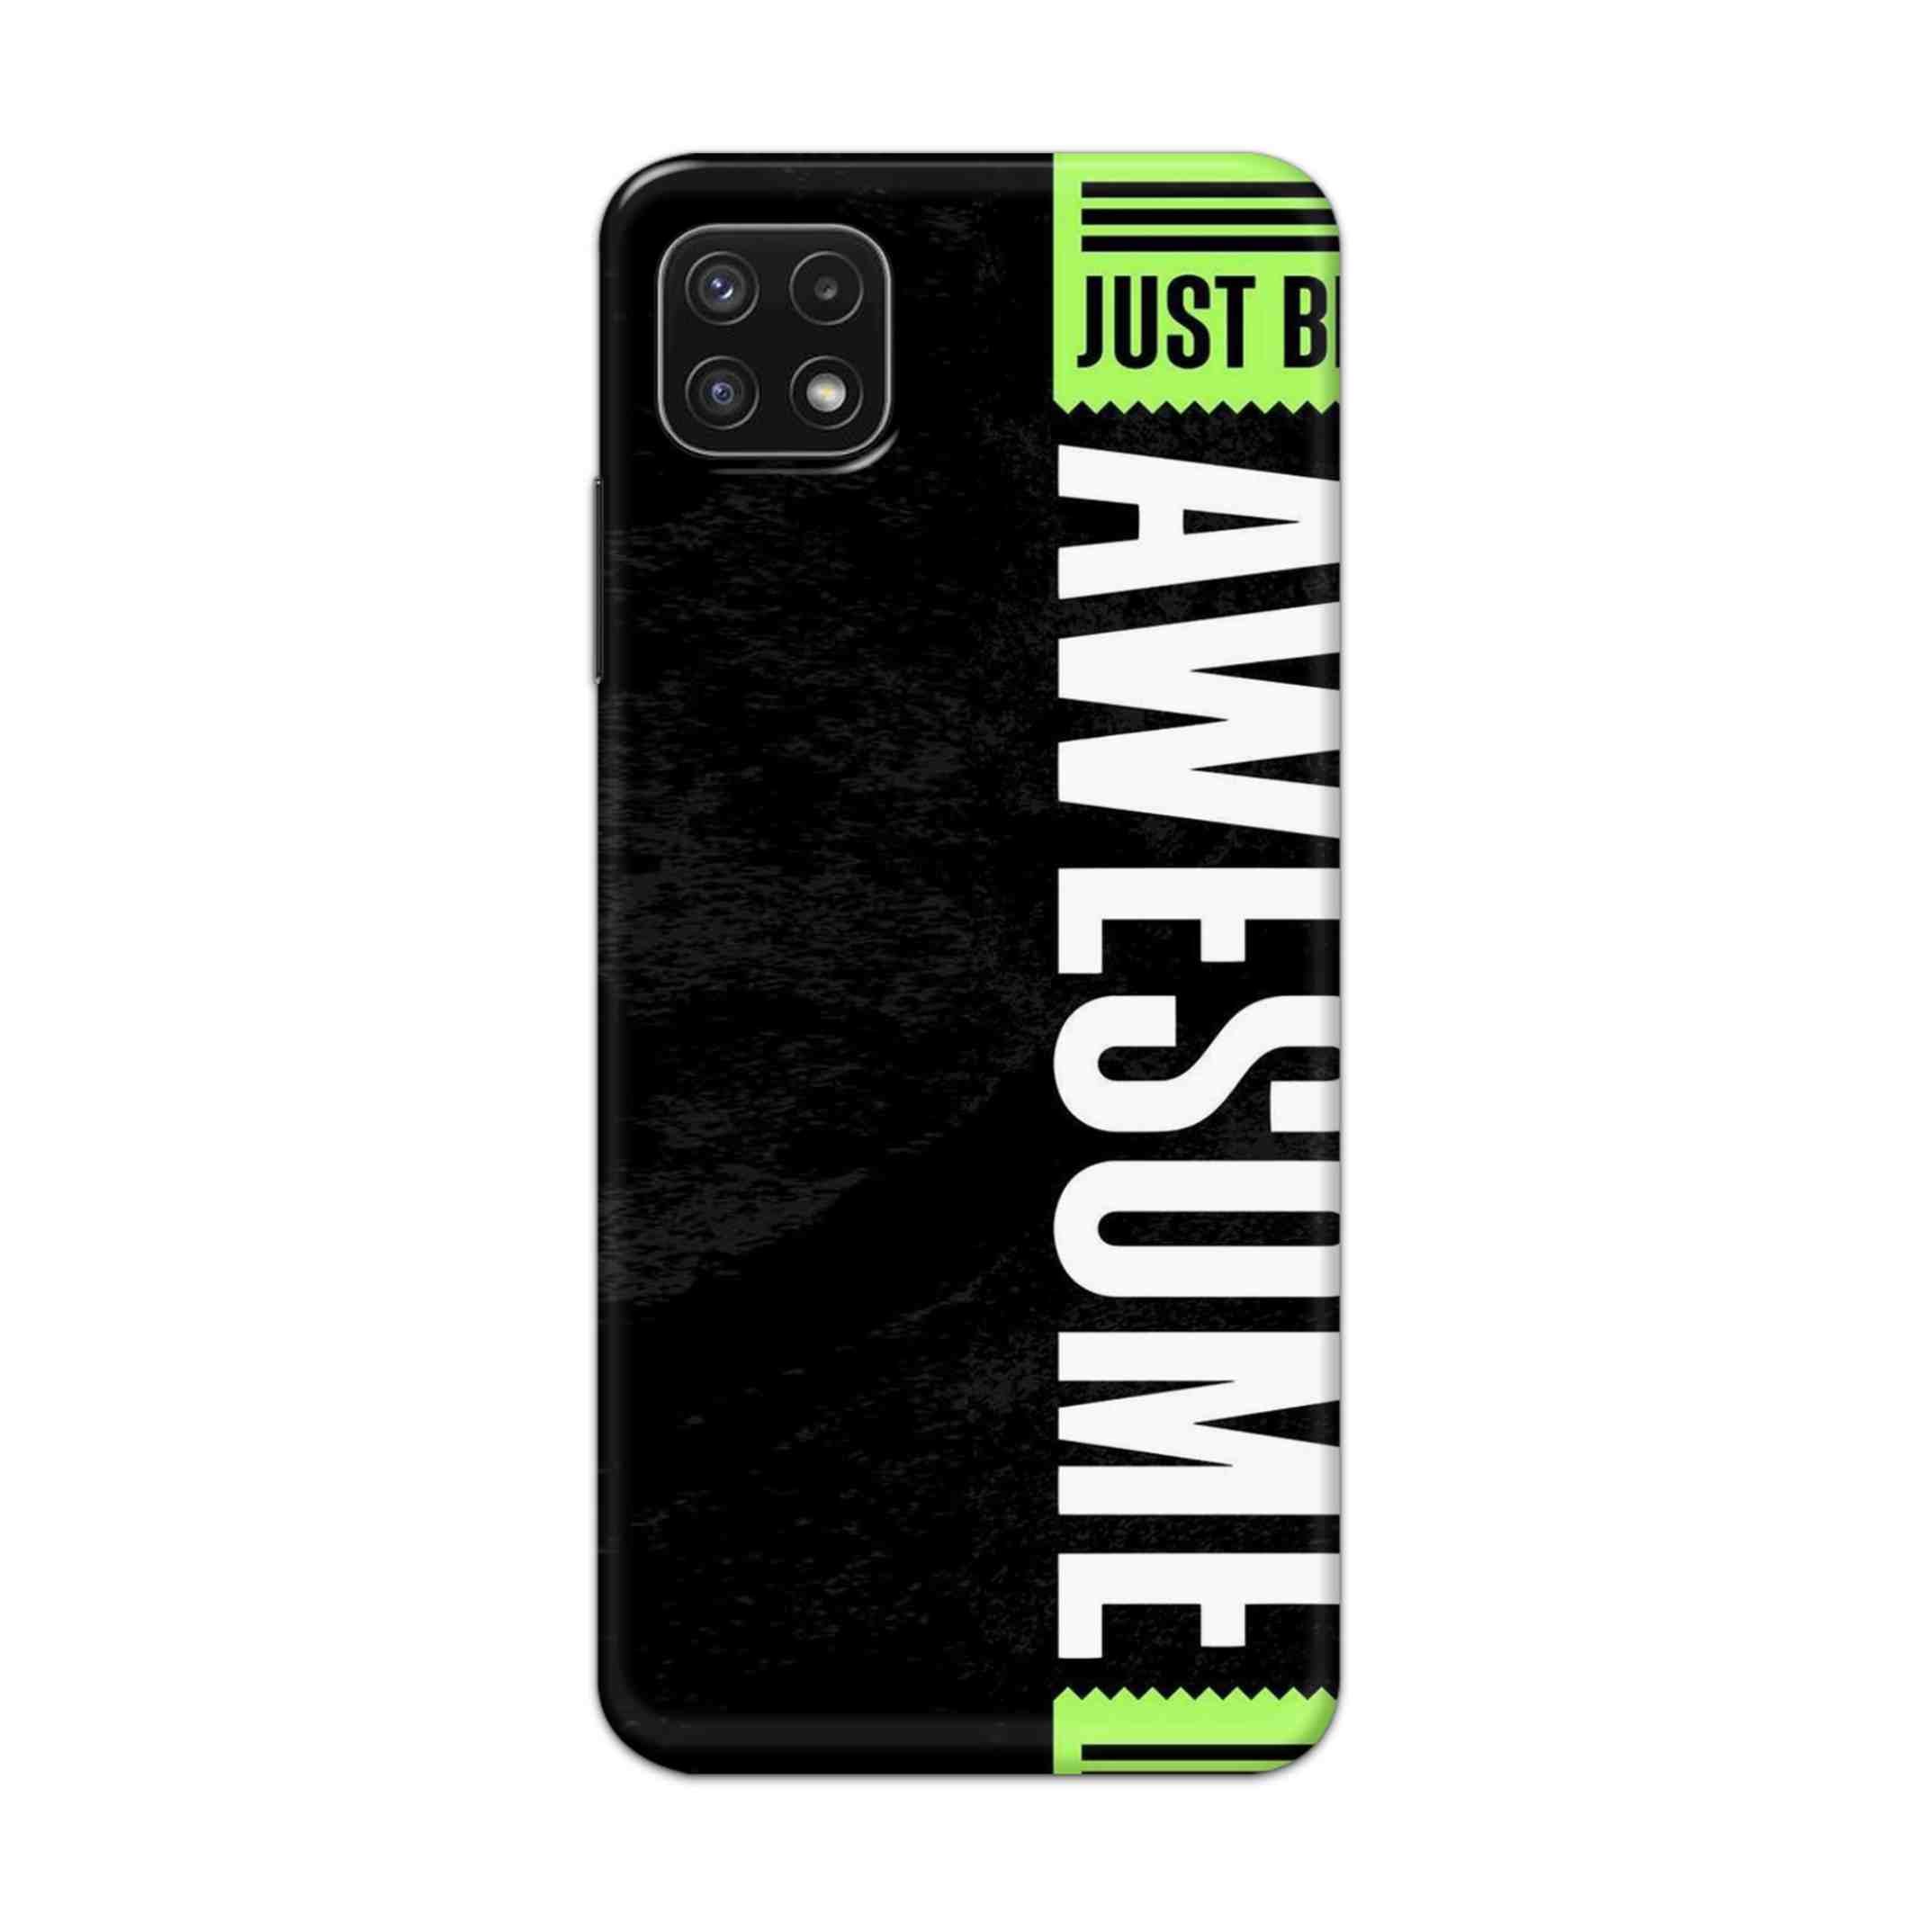 Buy Awesome Street Hard Back Mobile Phone Case Cover For Samsung A22 5G Online